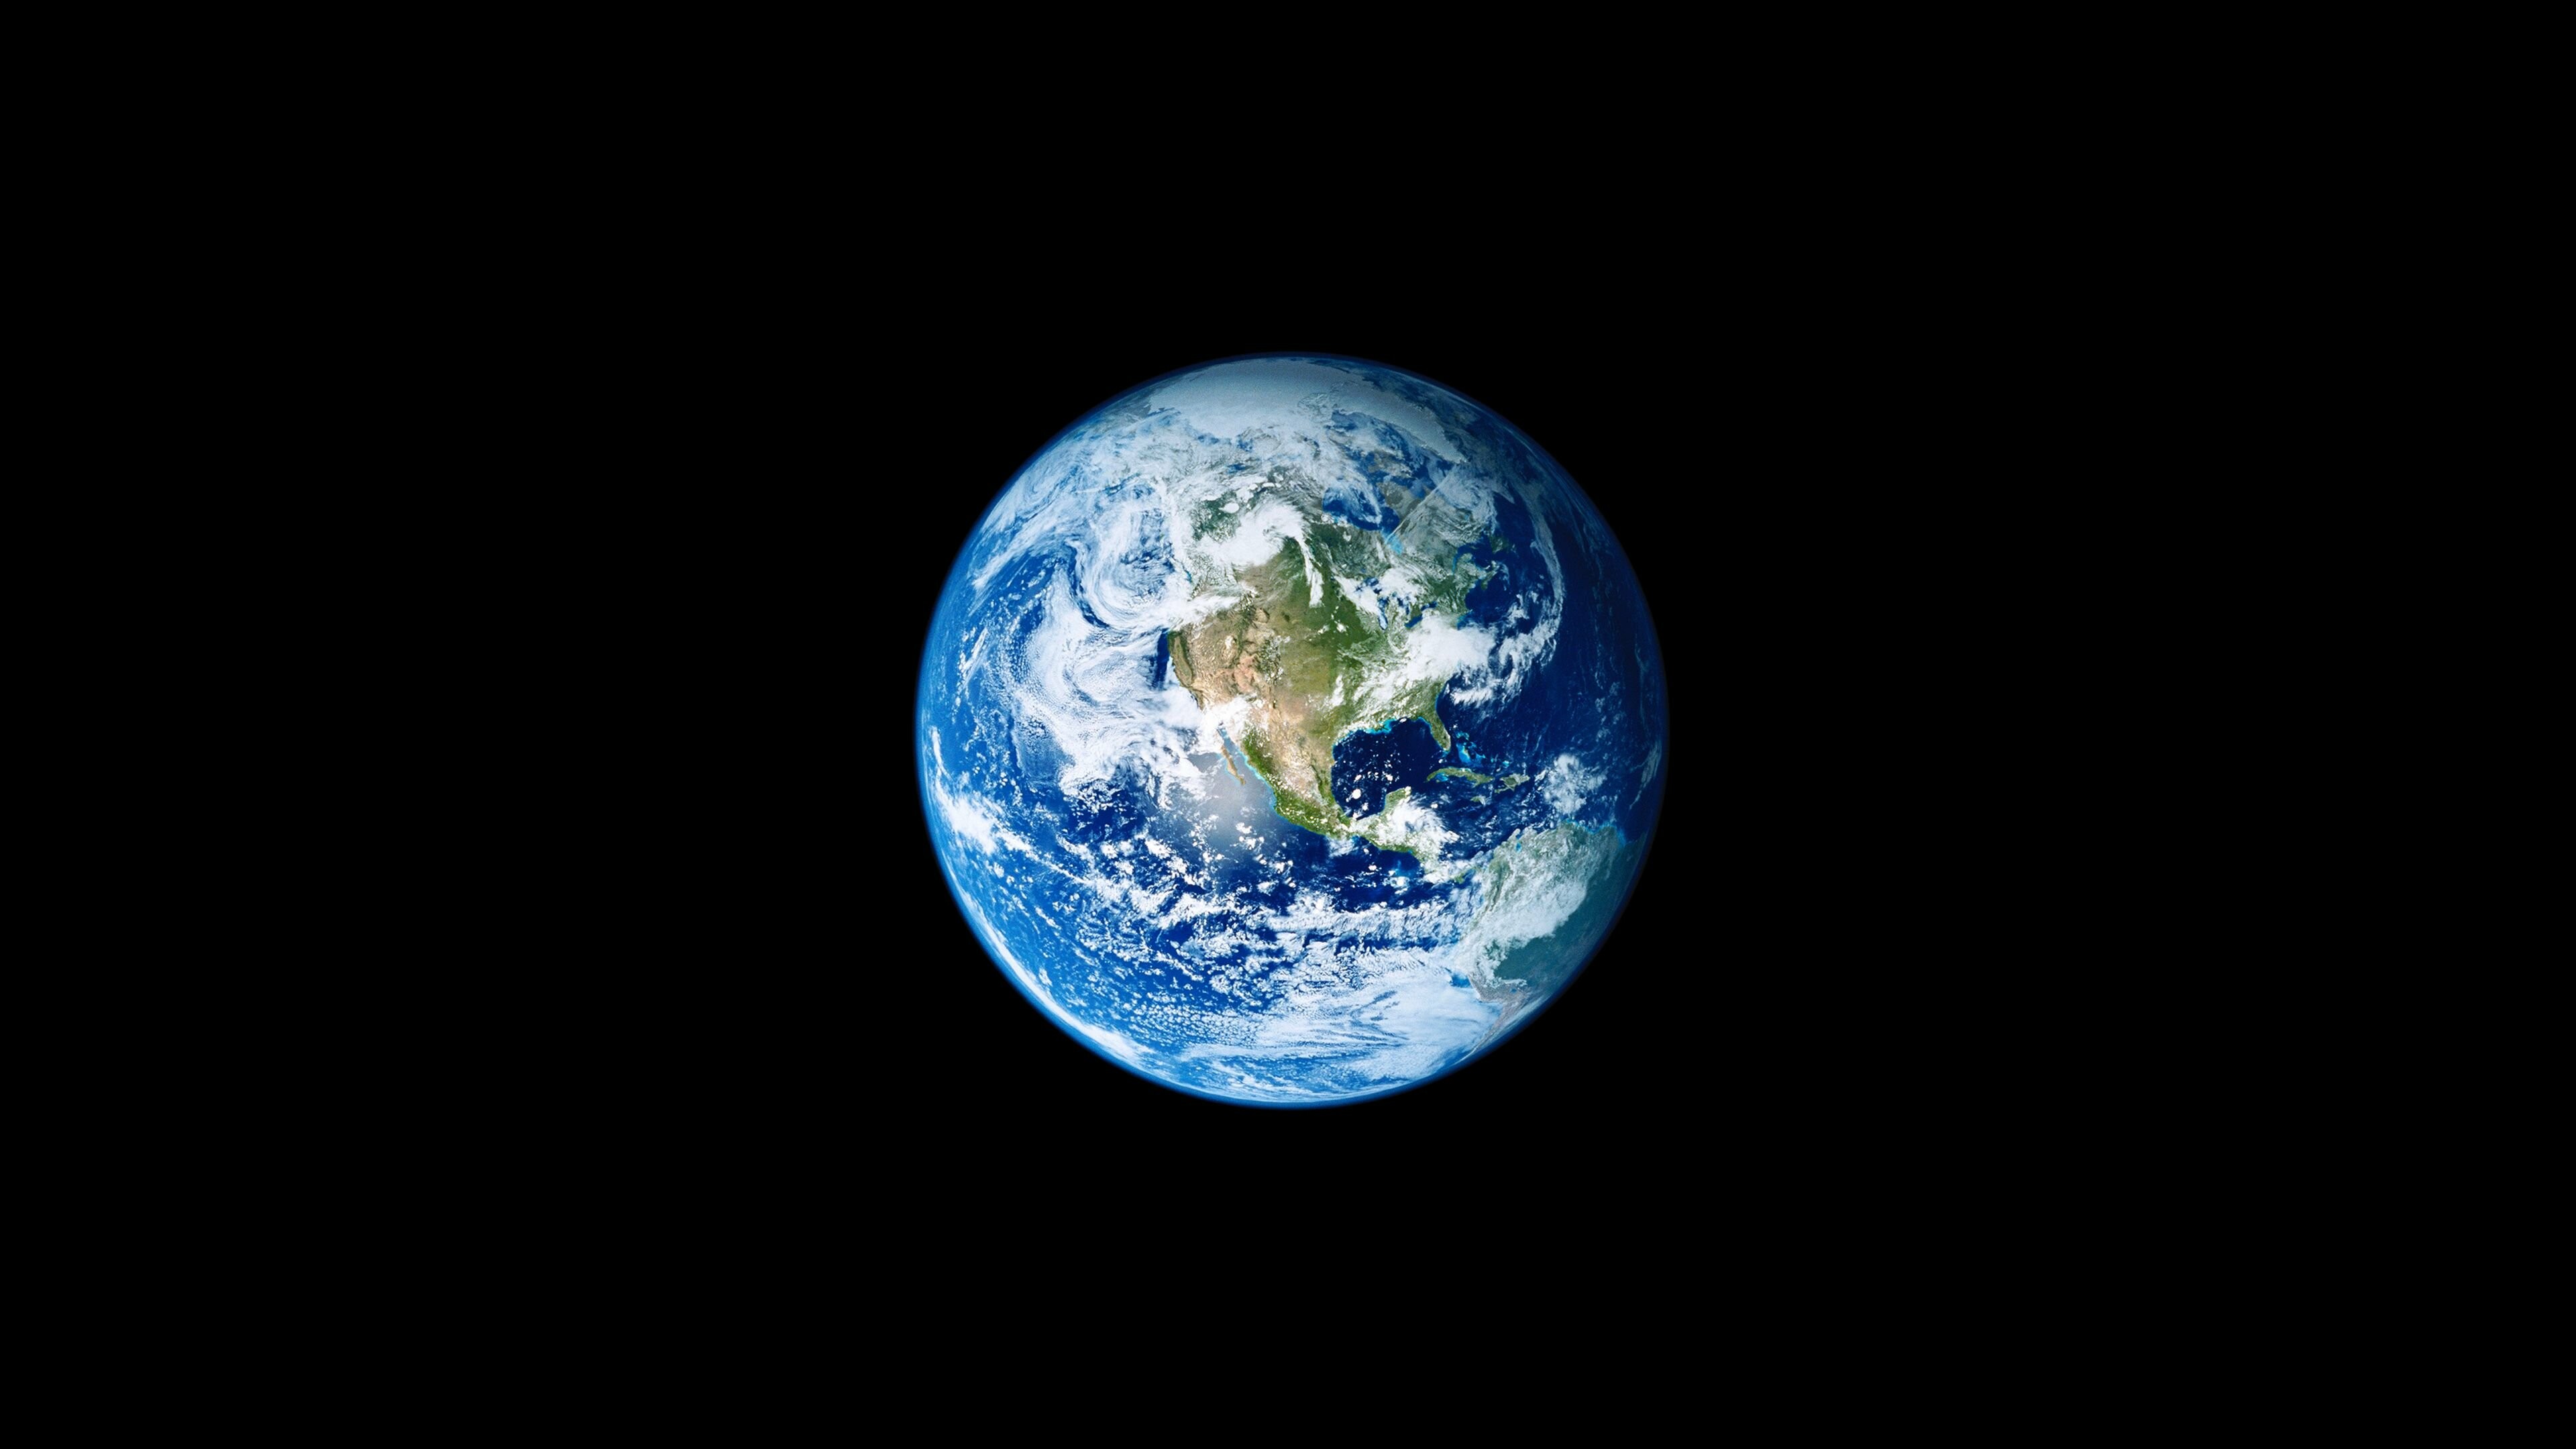 Earth: The densest planet in the Solar System, Universe, Cosmos. 3840x2160 4K Background.